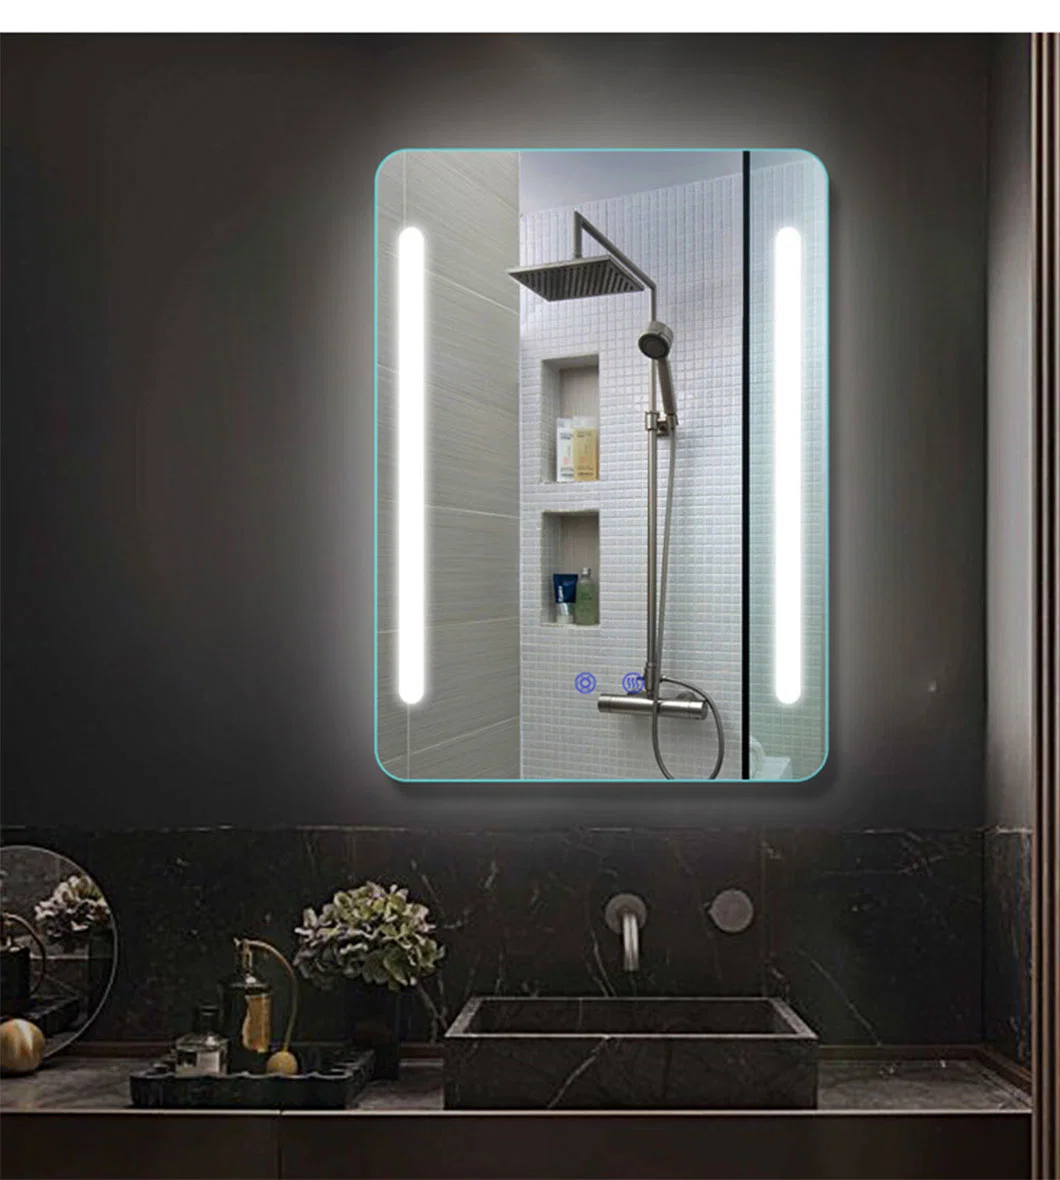 Factory Direct 21.5 Inch Touch Screen Bathroom Smart Mirror with WiFi Android System Glass LED Light TV Mirror